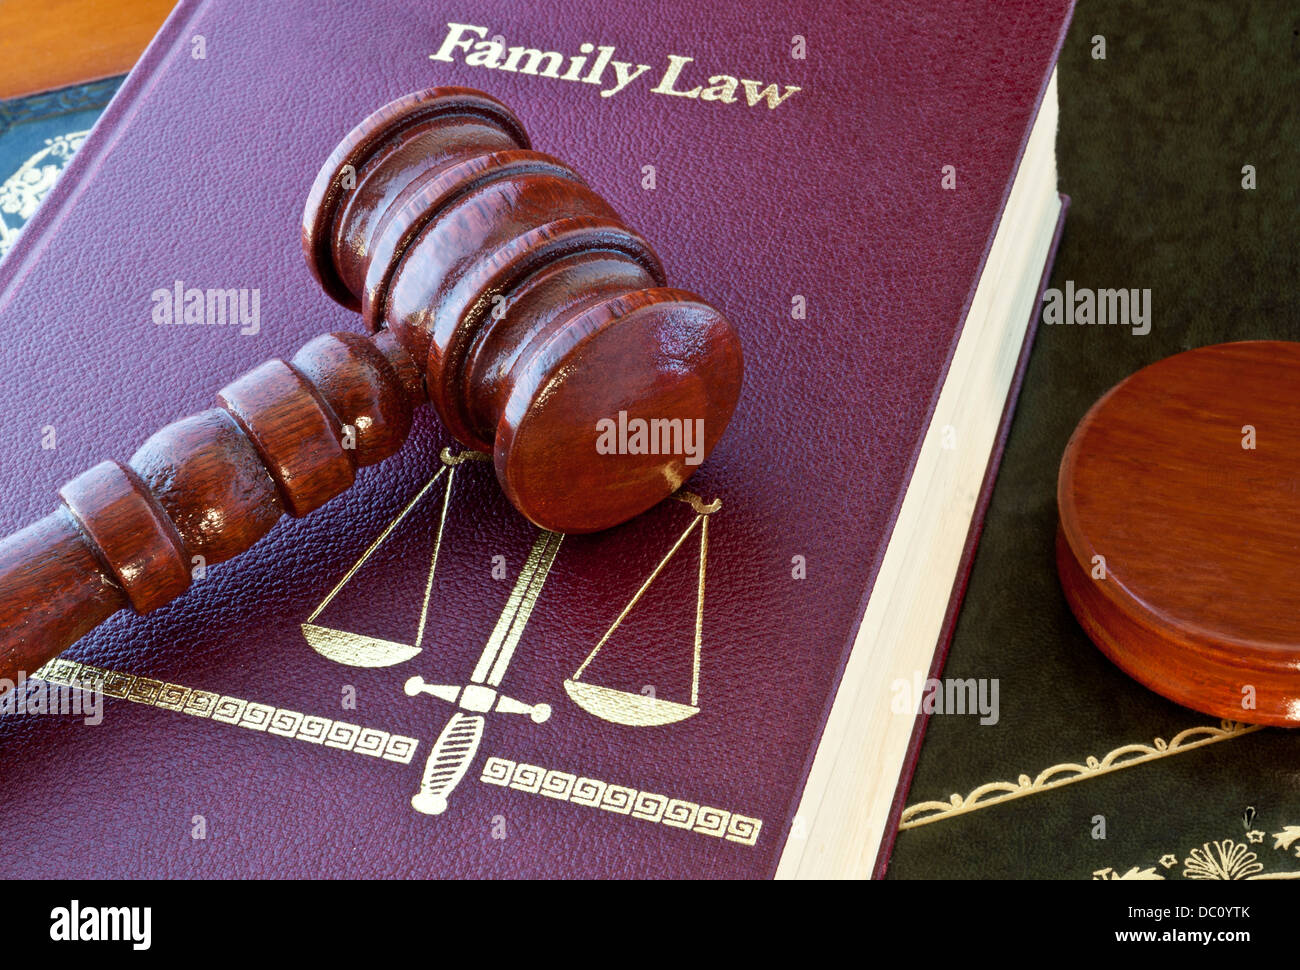 LAW COURT SENTENCING Judges wooden gavel on 'Family Law' book with gold sword and scales of justice emblem Stock Photo